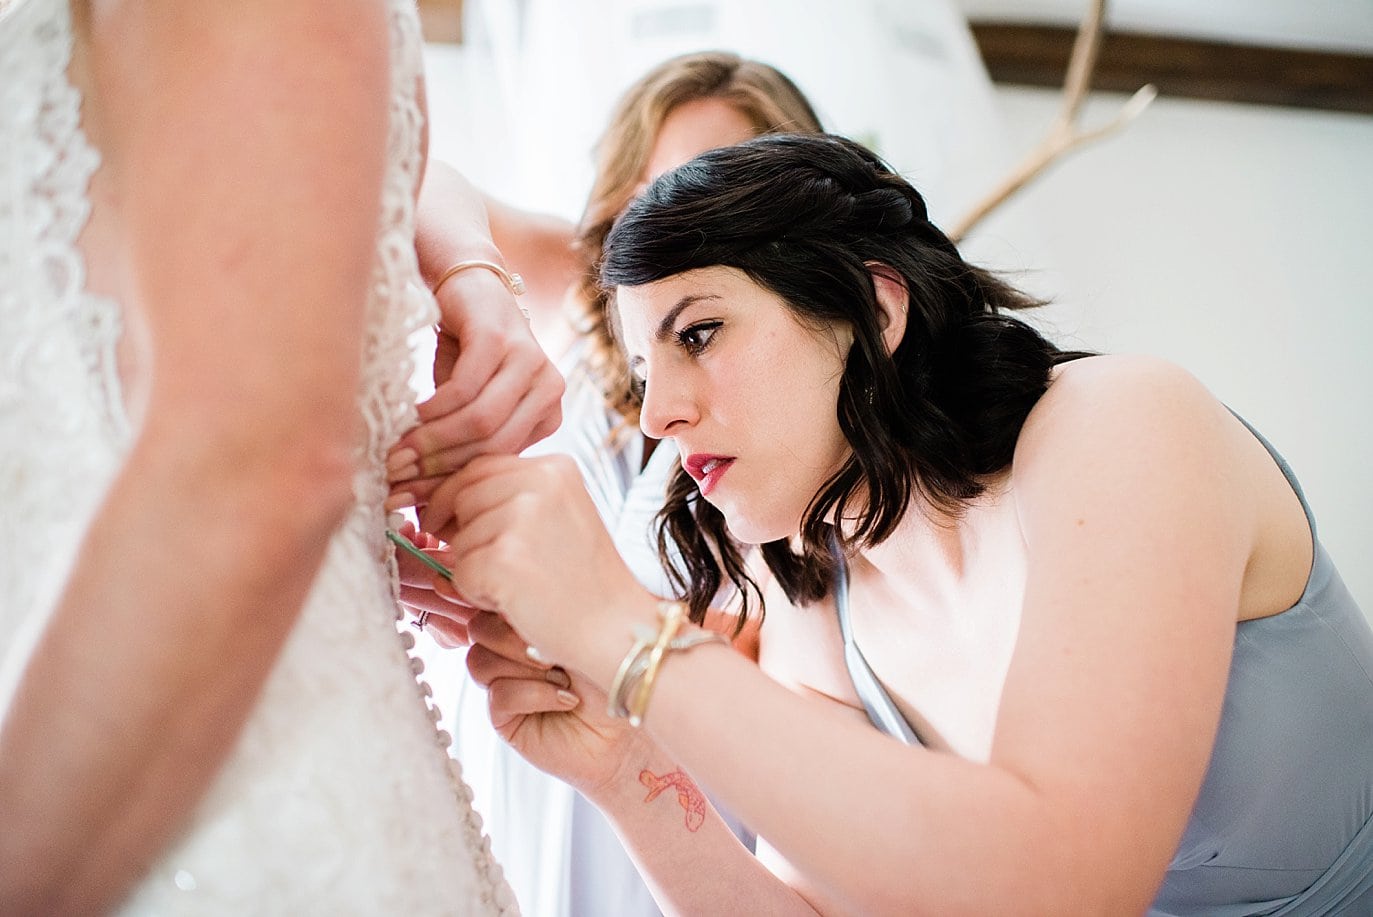 Bride getting dressed with bridesmaid help at Sonnenalp Hotel by Avon wedding photographer Jennie Crate